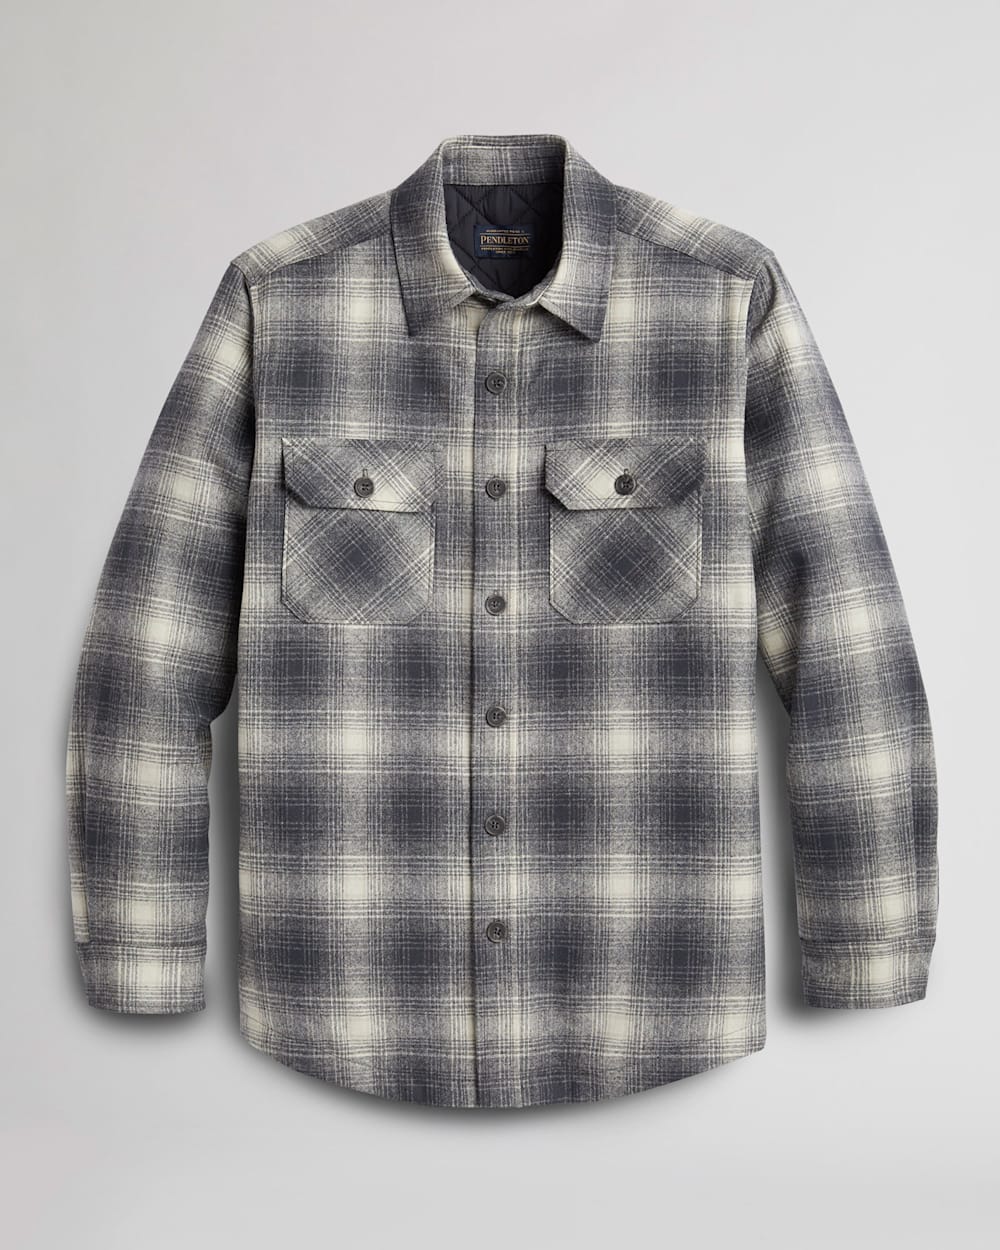 ALTERNATE VIEW OF MEN'S PLAID QUILTED SHIRT JACKET IN SLATE/WHITE image number 6